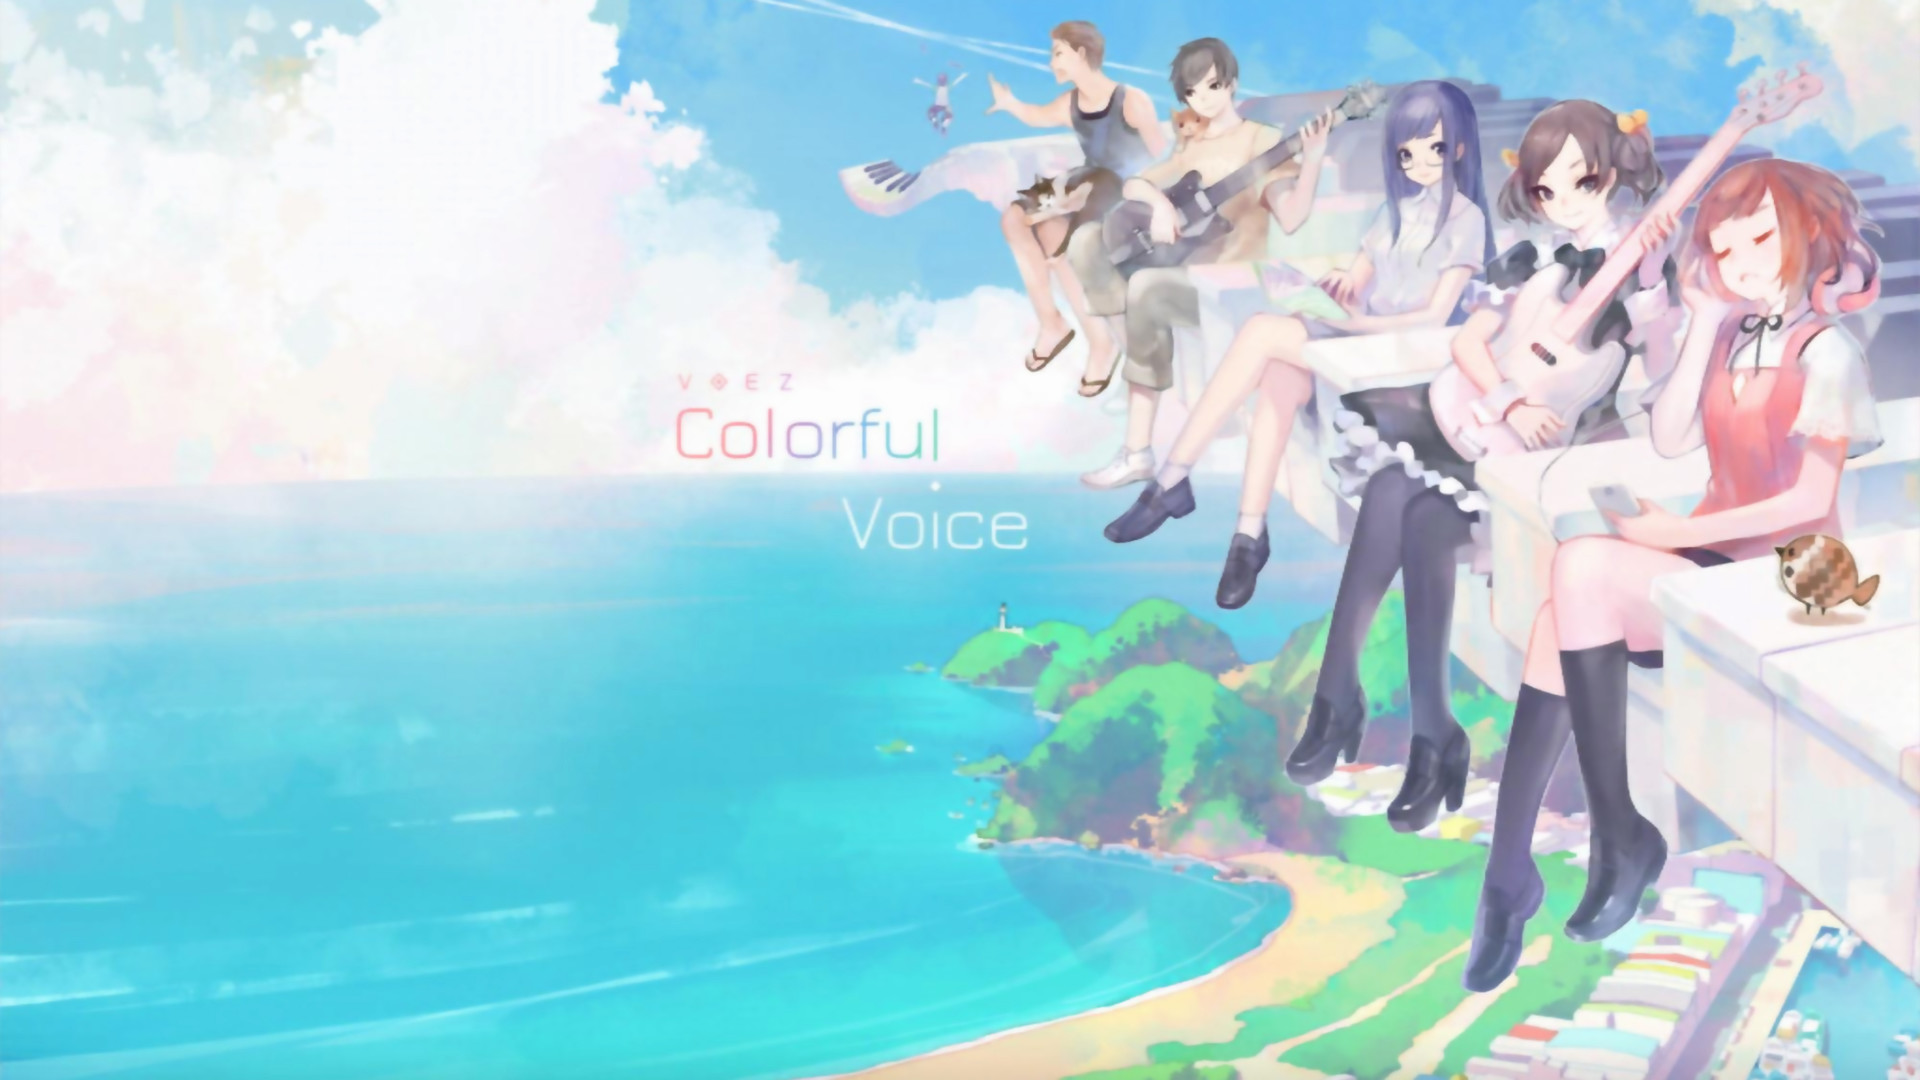 1920x1080 VOEZ Wallpapers, Pictures, Images